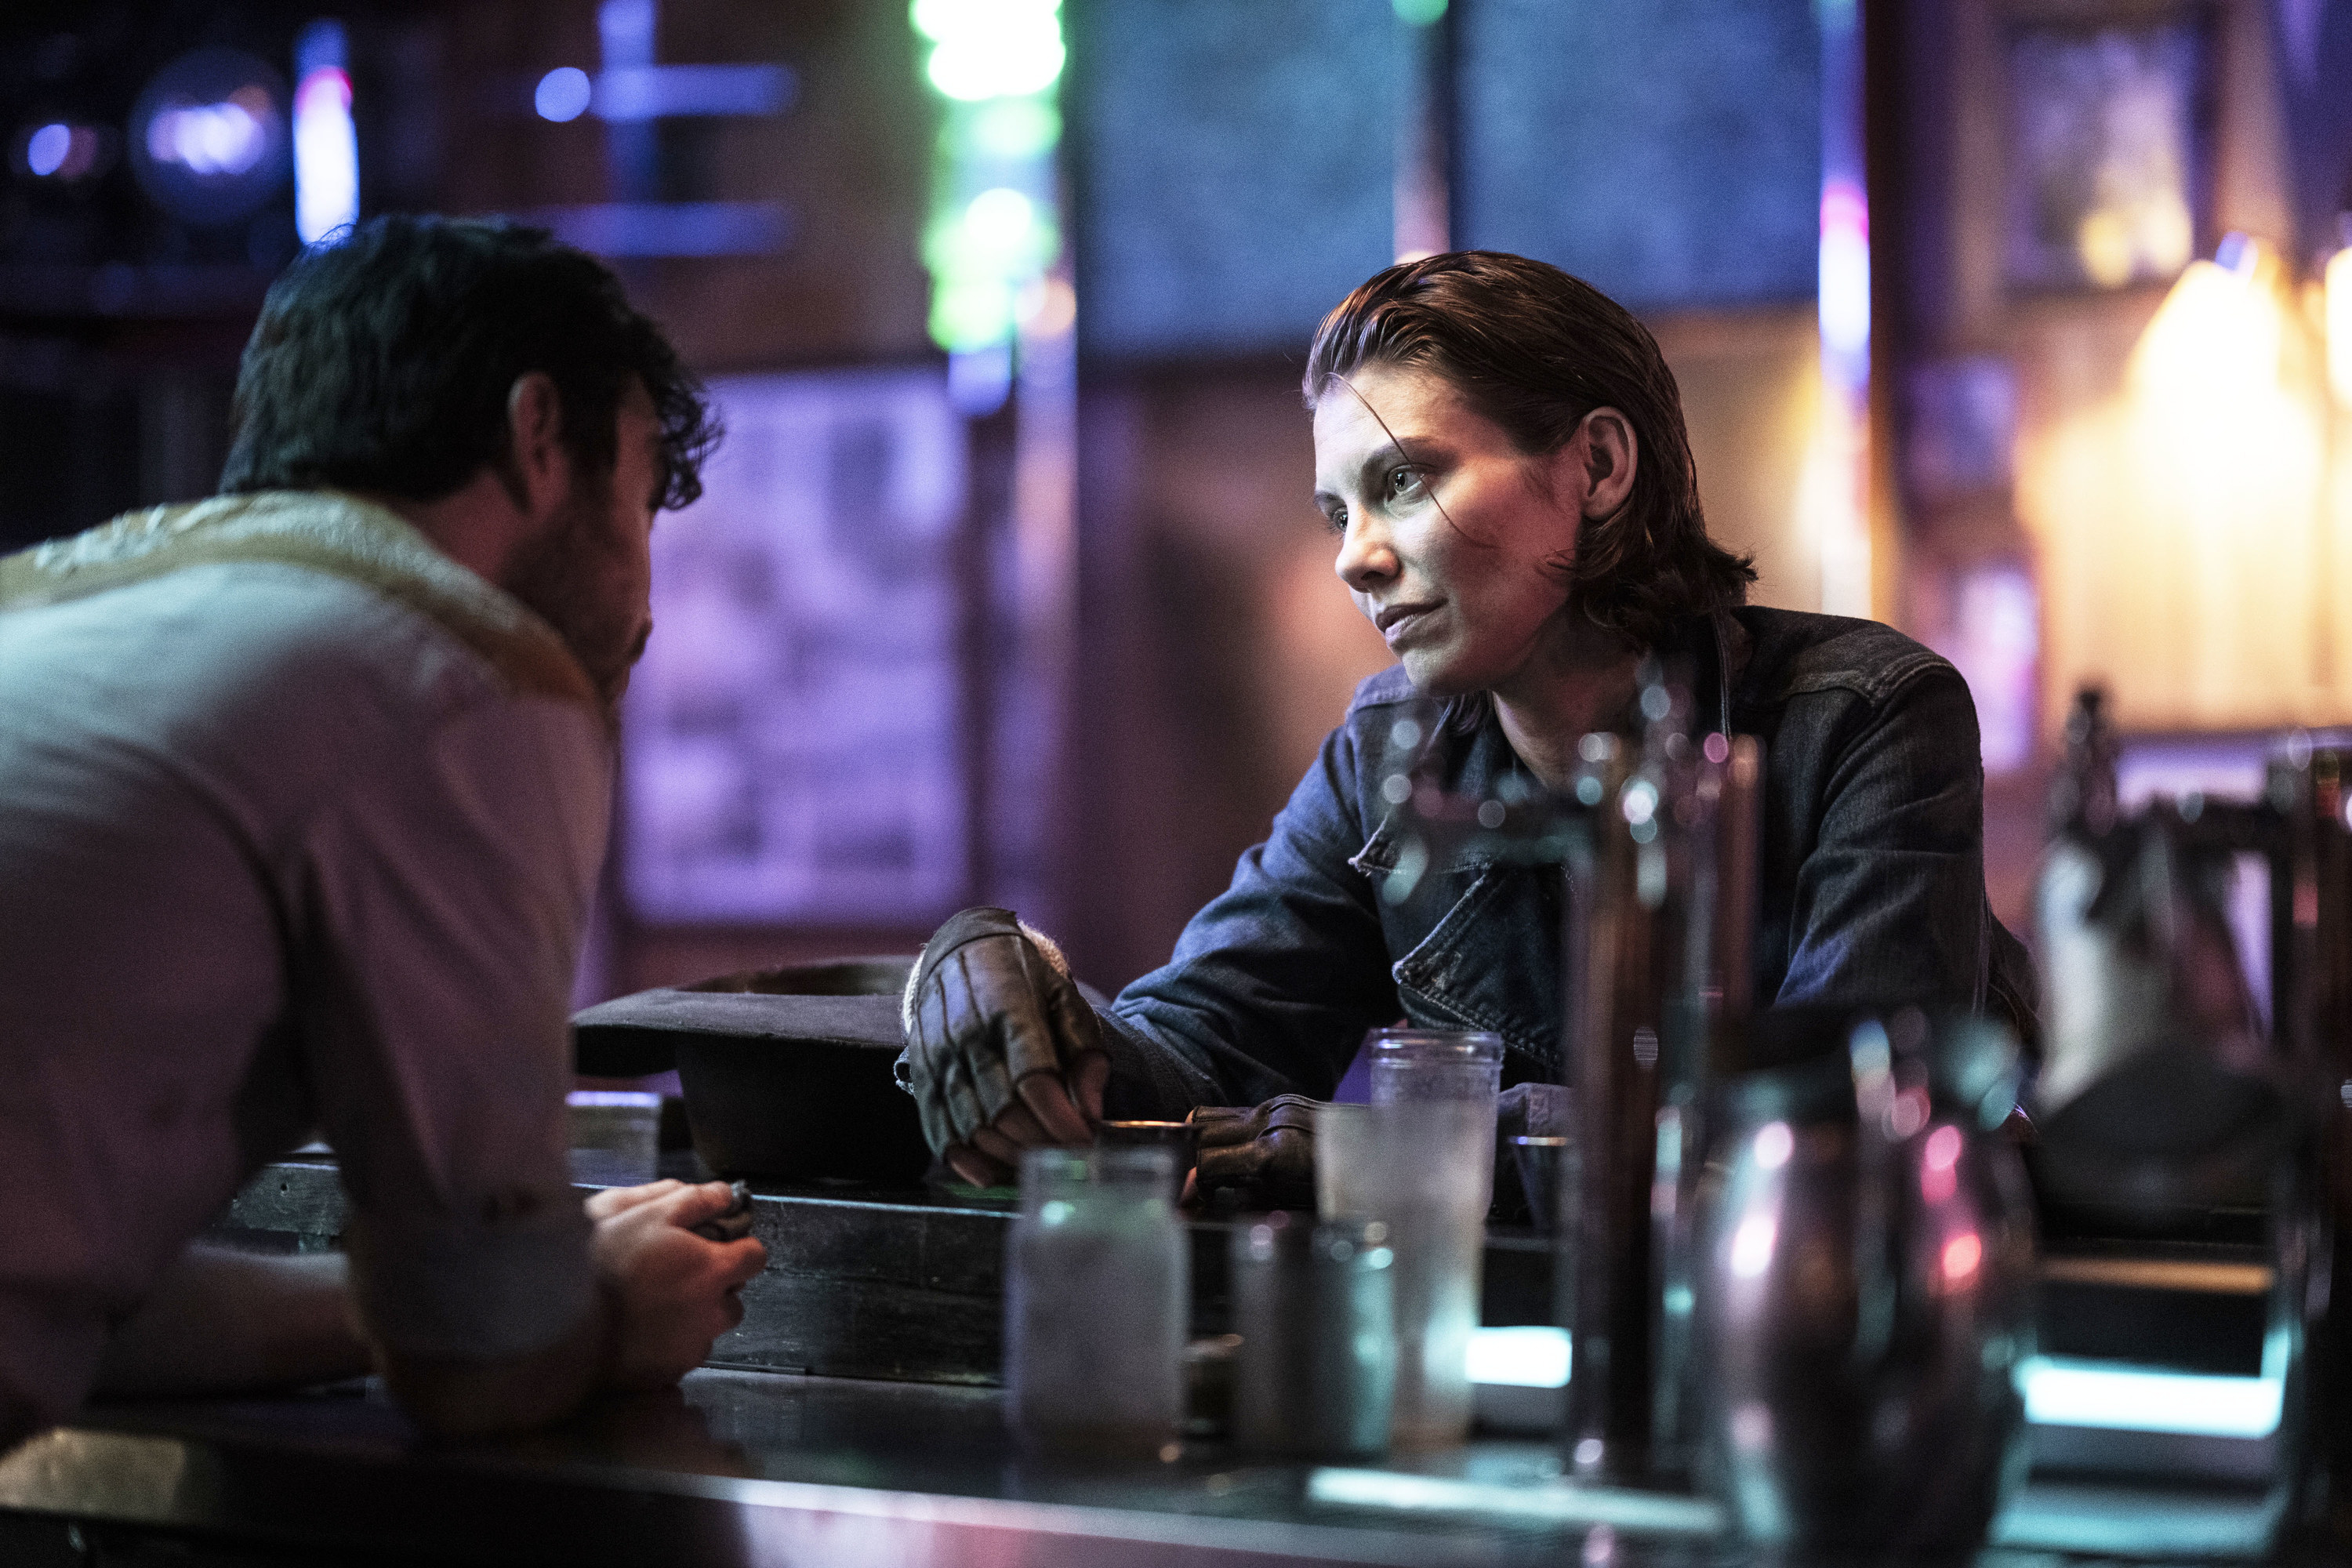 maggie talking to someone across a bar